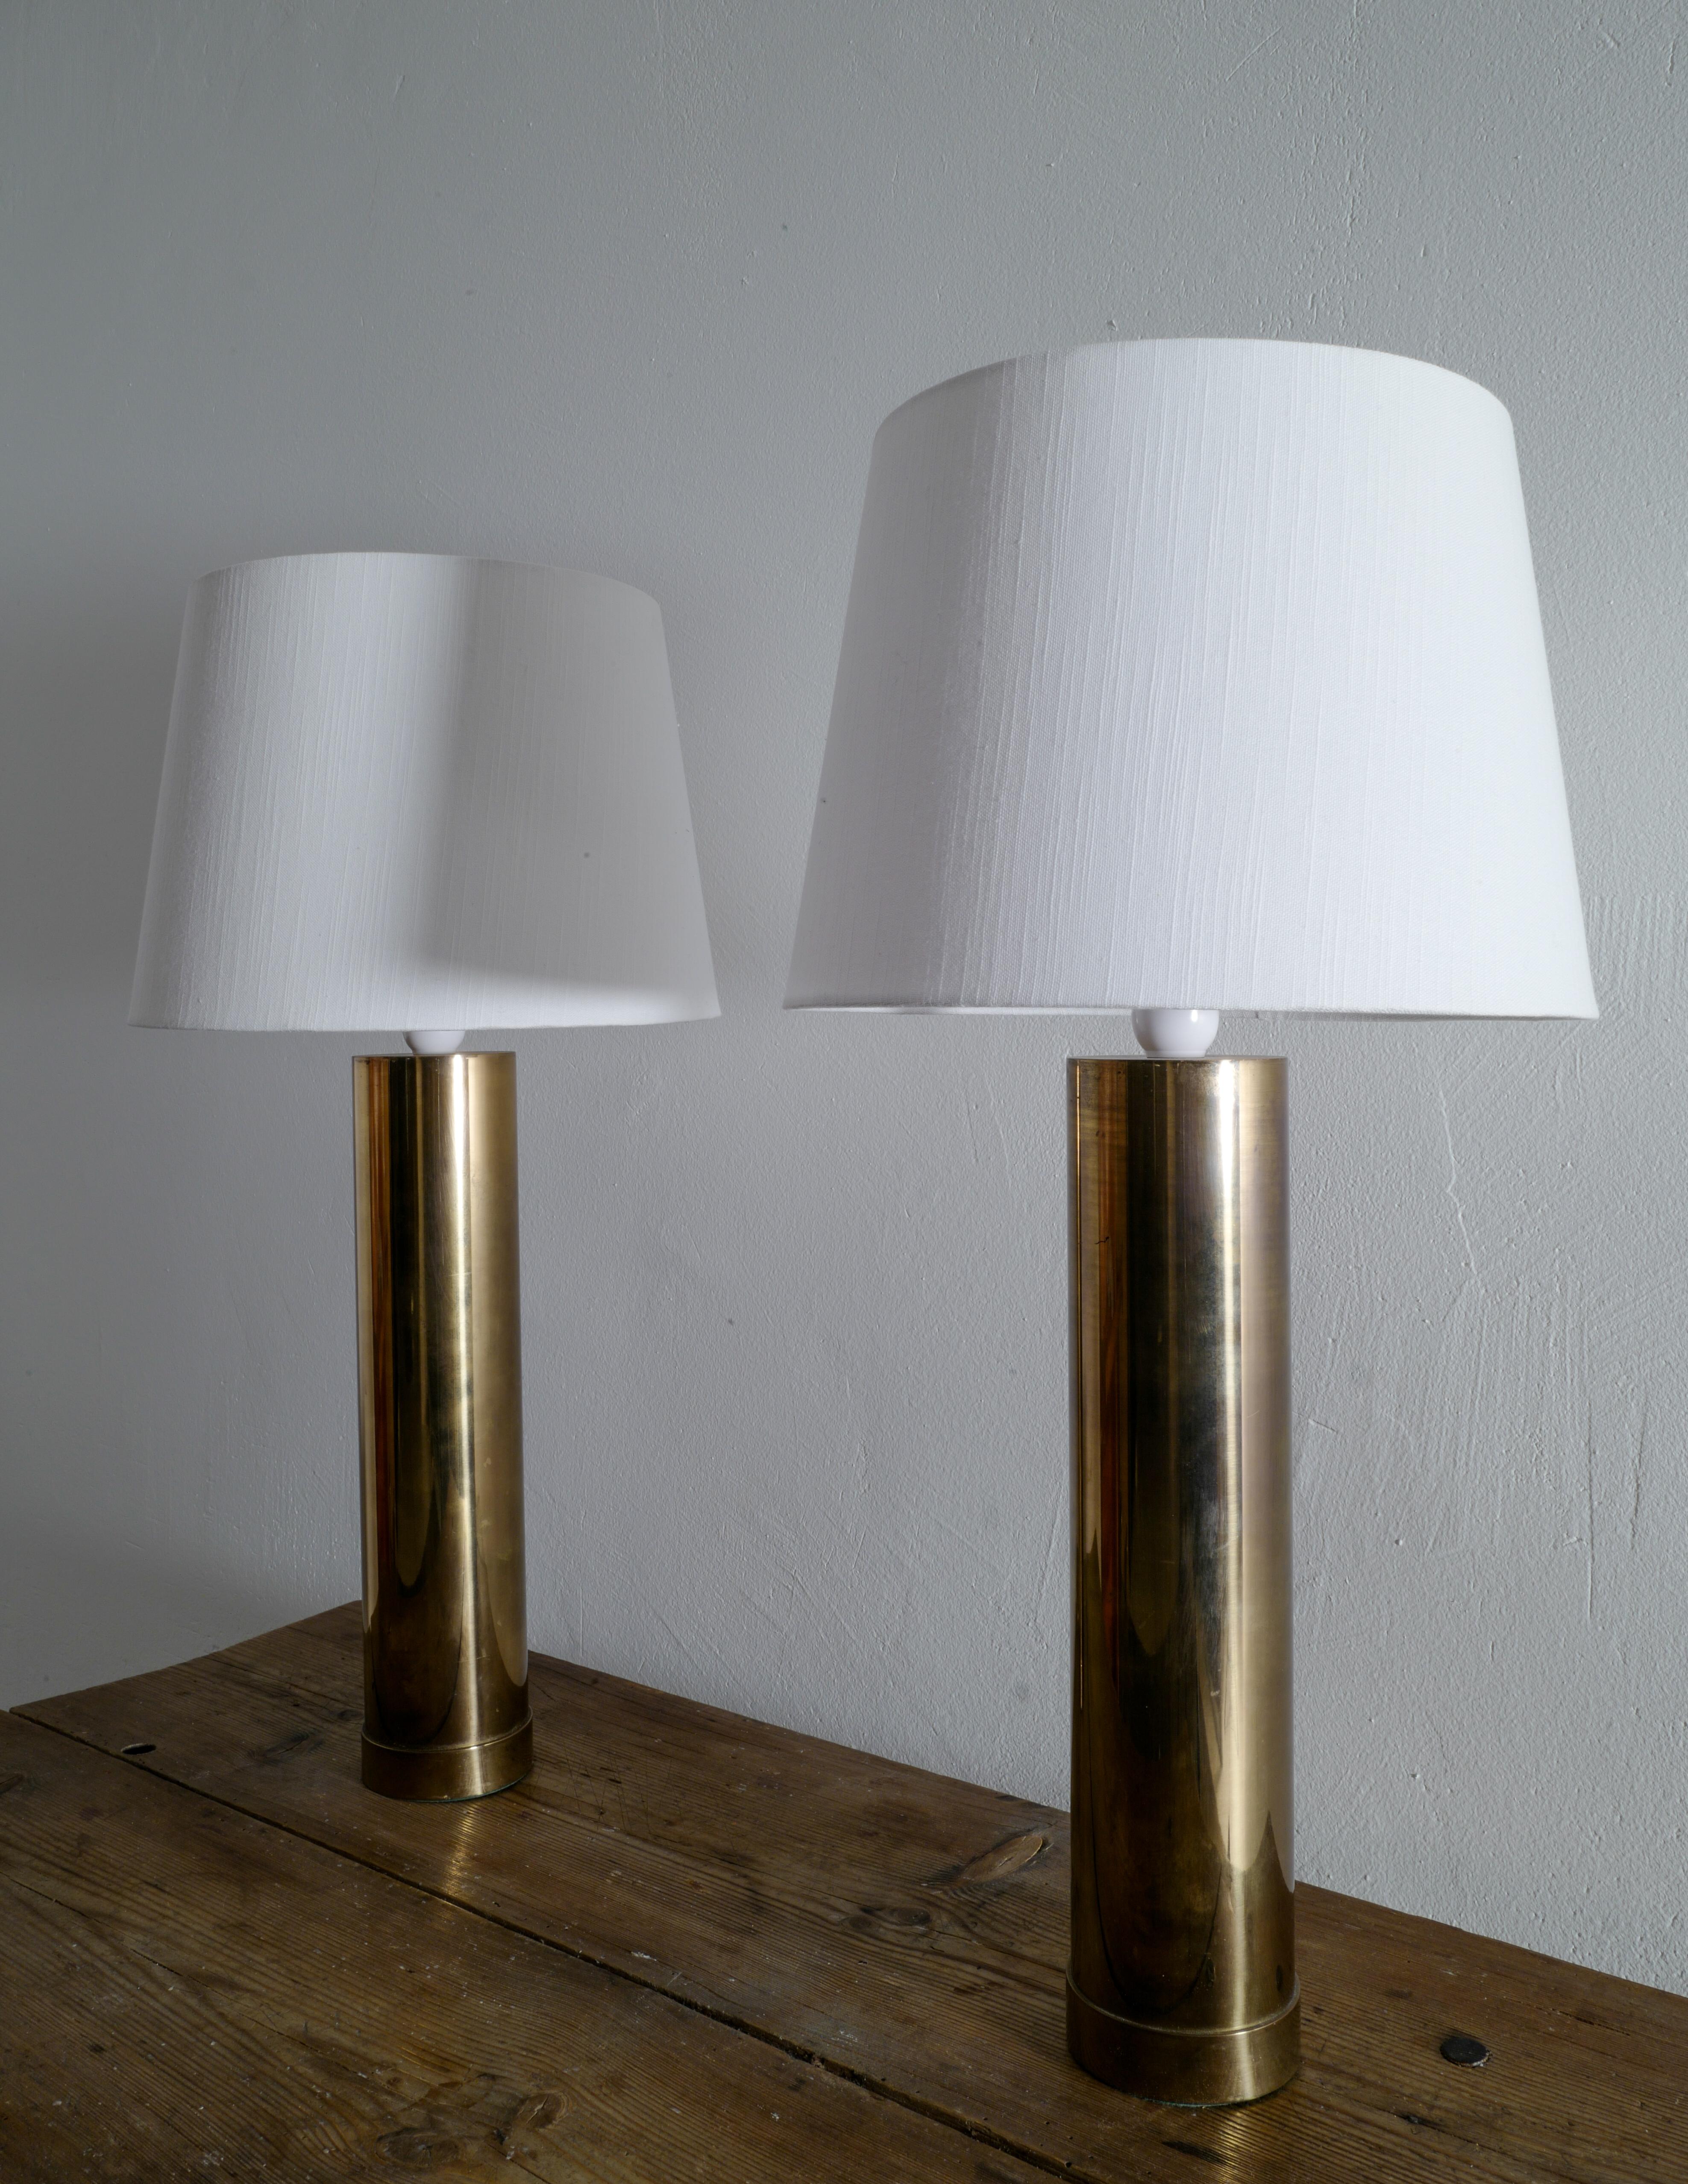 Rare pair of 1960s table lamps in brass produced by Bergboms. Signed and marked att he bottom.

Shades are excluded from the purchase.